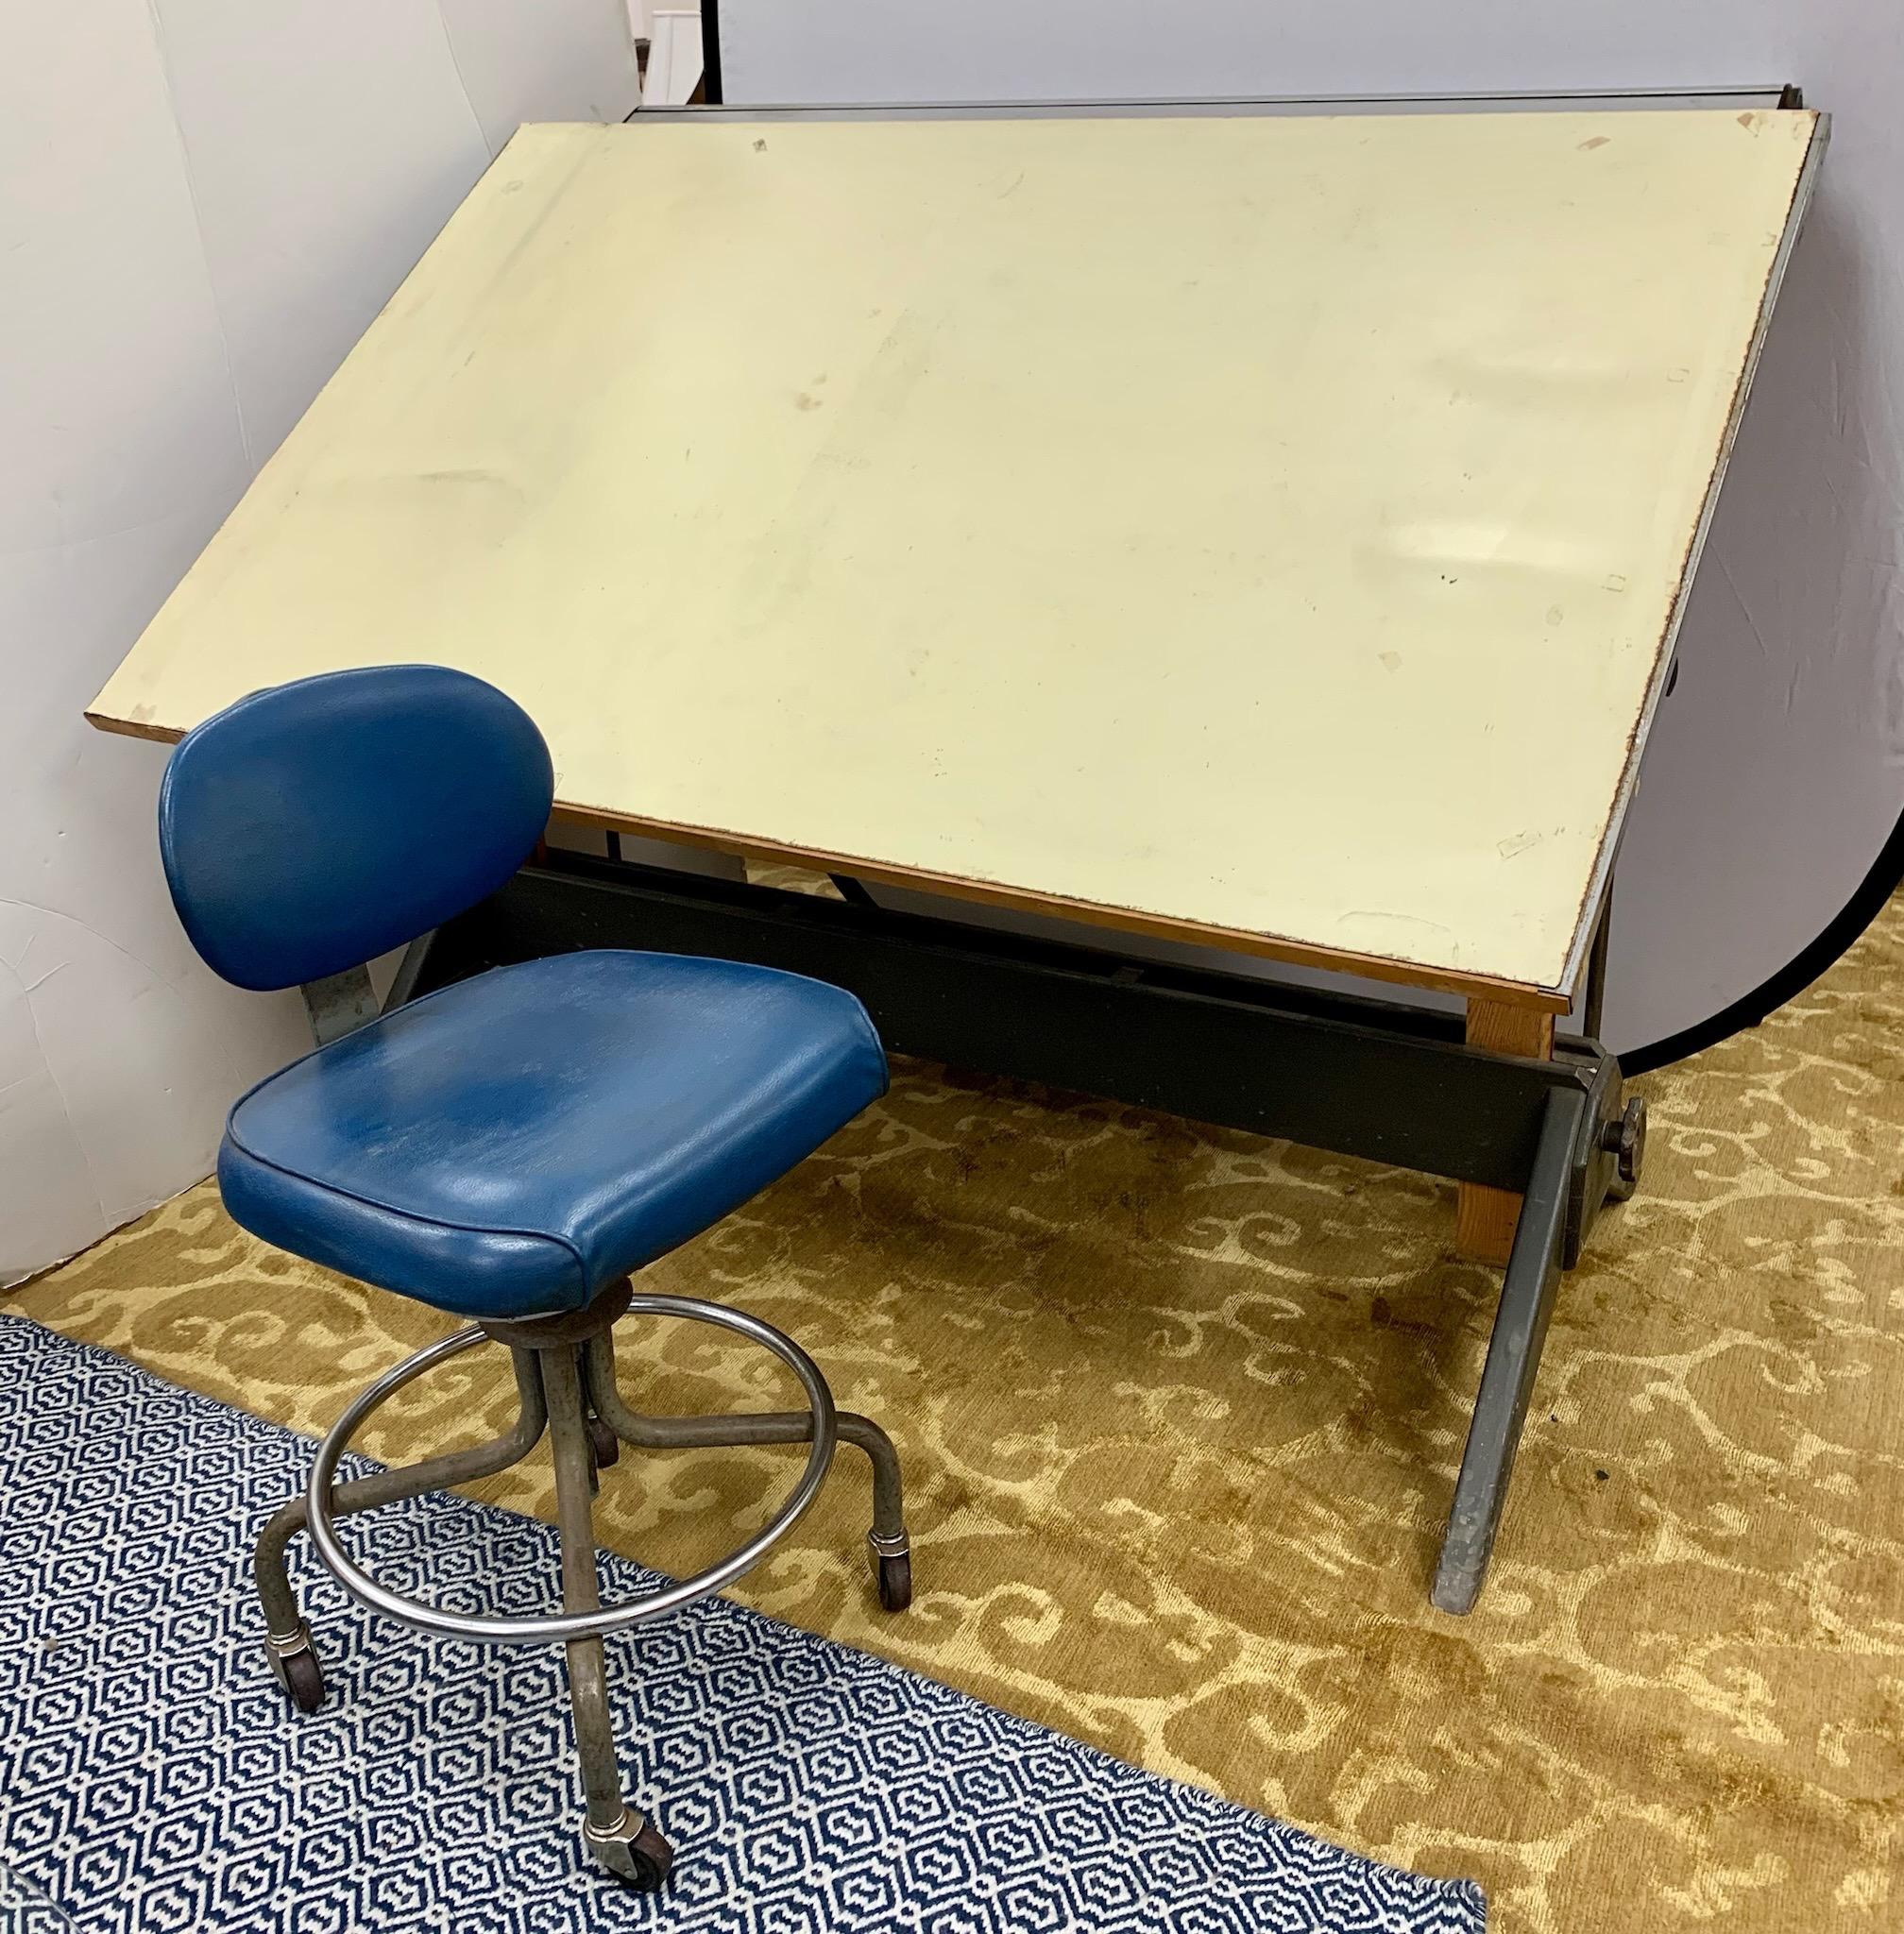 1950's/60's Mid-century architect drafting table. Solid oak with metal base and cast iron hardware. The writing surface under the removable rubber surface has not been examined. With blue leather adjustable swivel chair on castors. Adjustable height